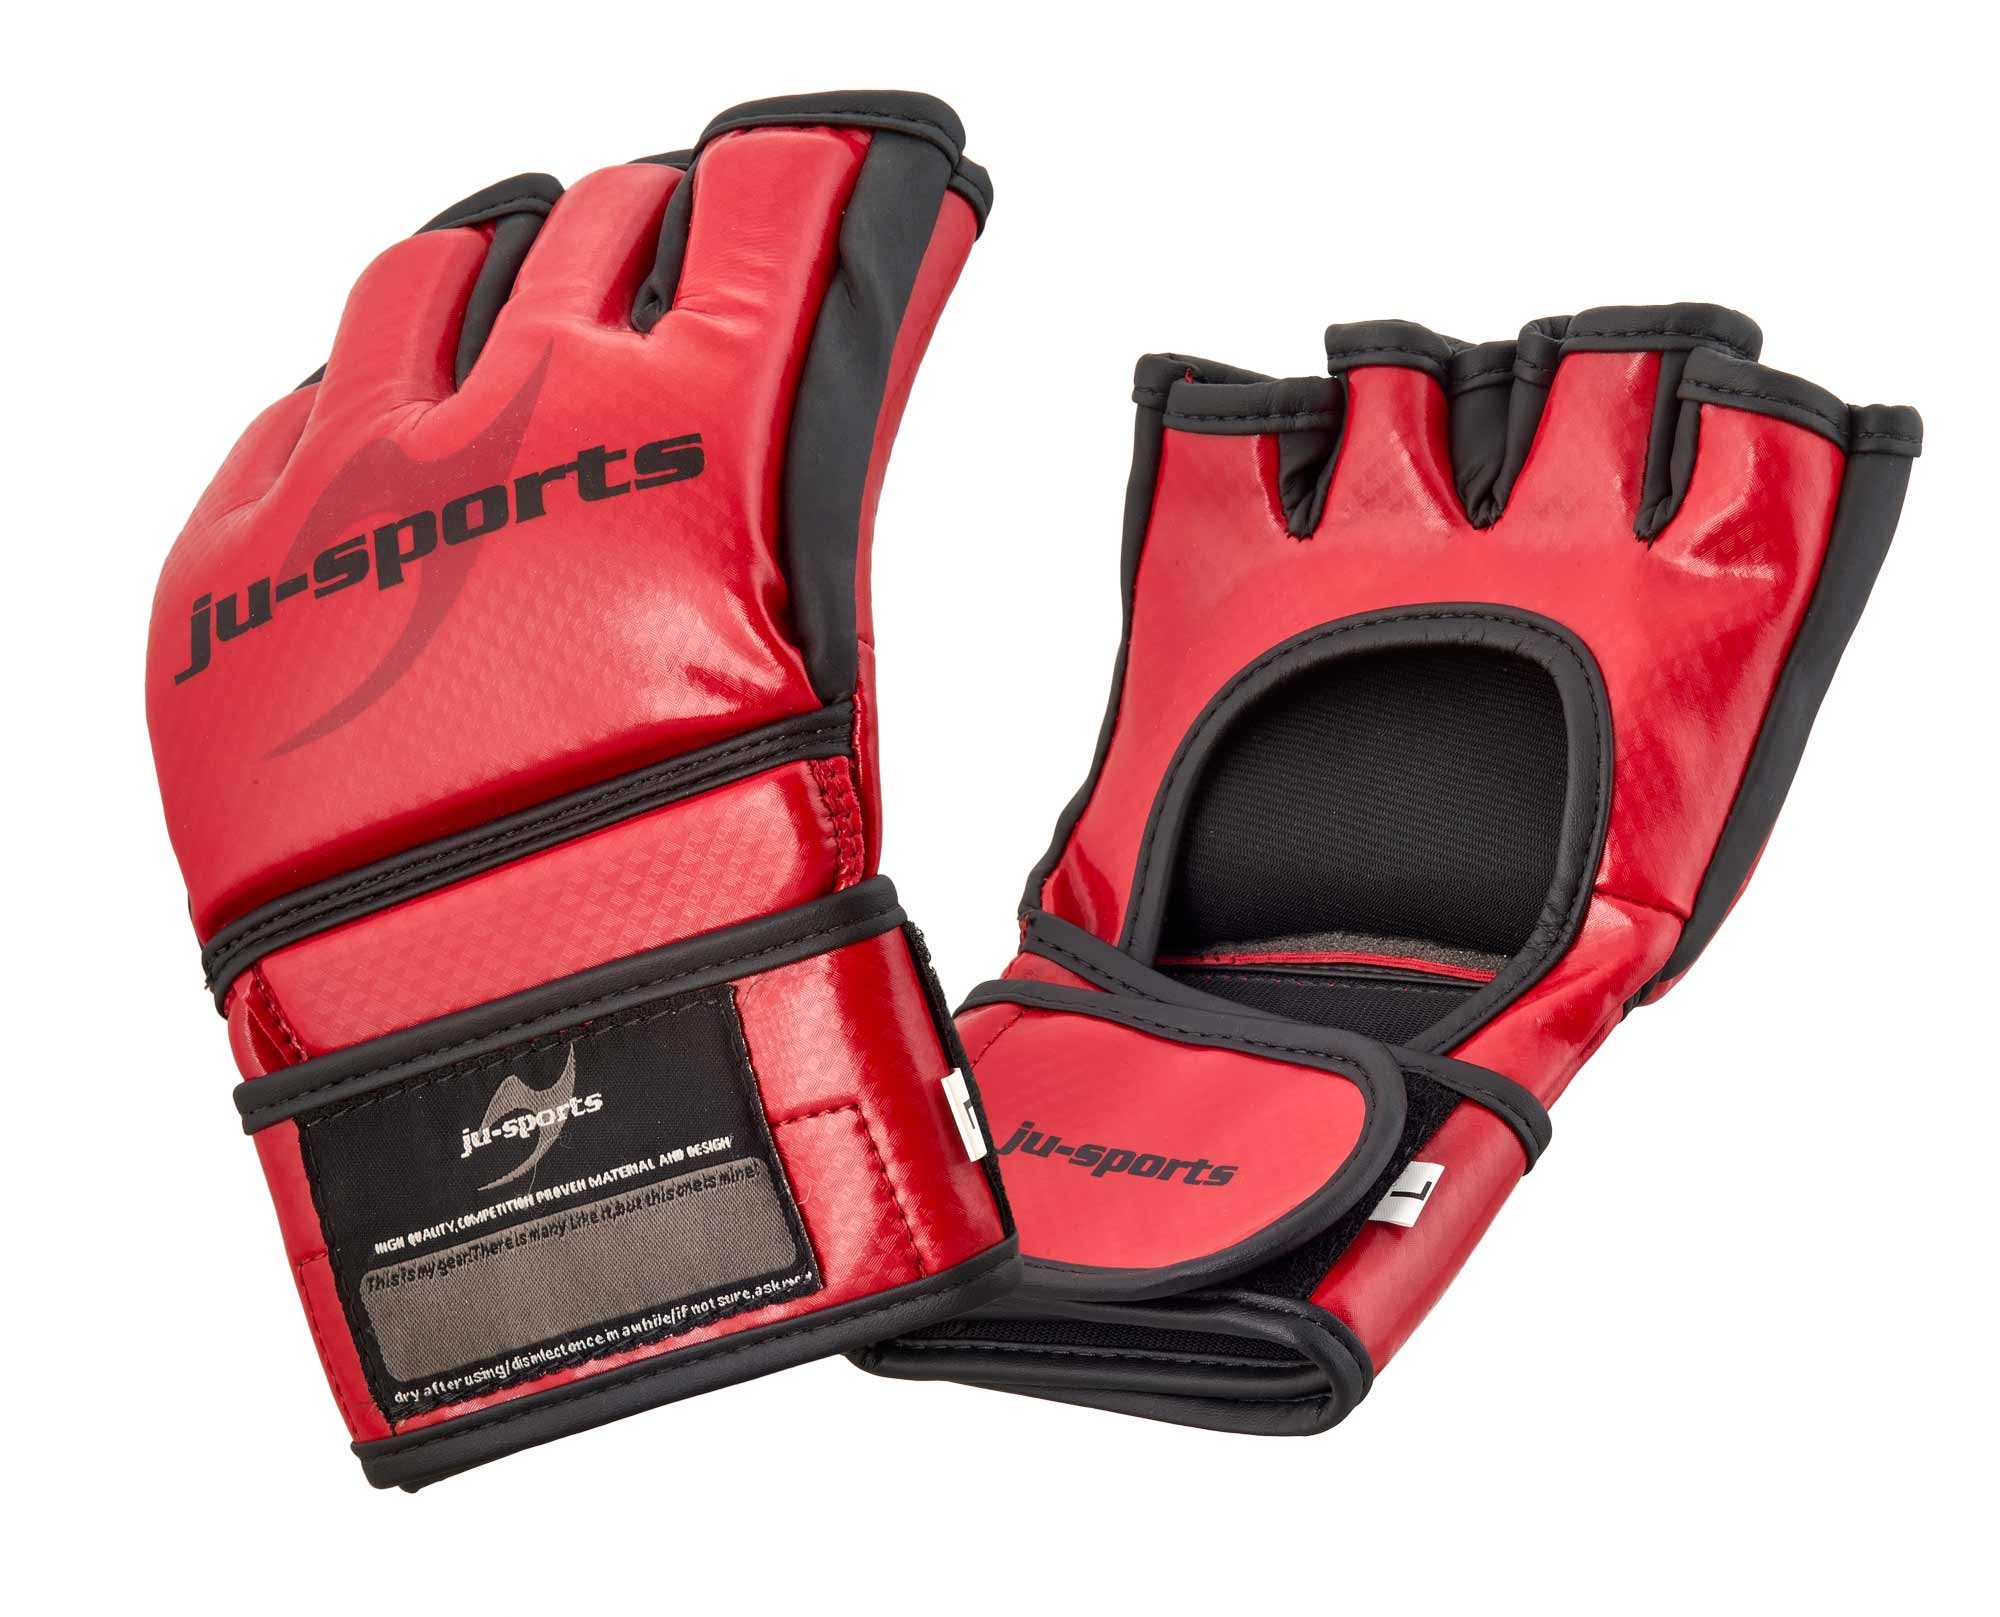 MMA Wettkampf-Handschuh - Competition Pro red ju-sports Carbon